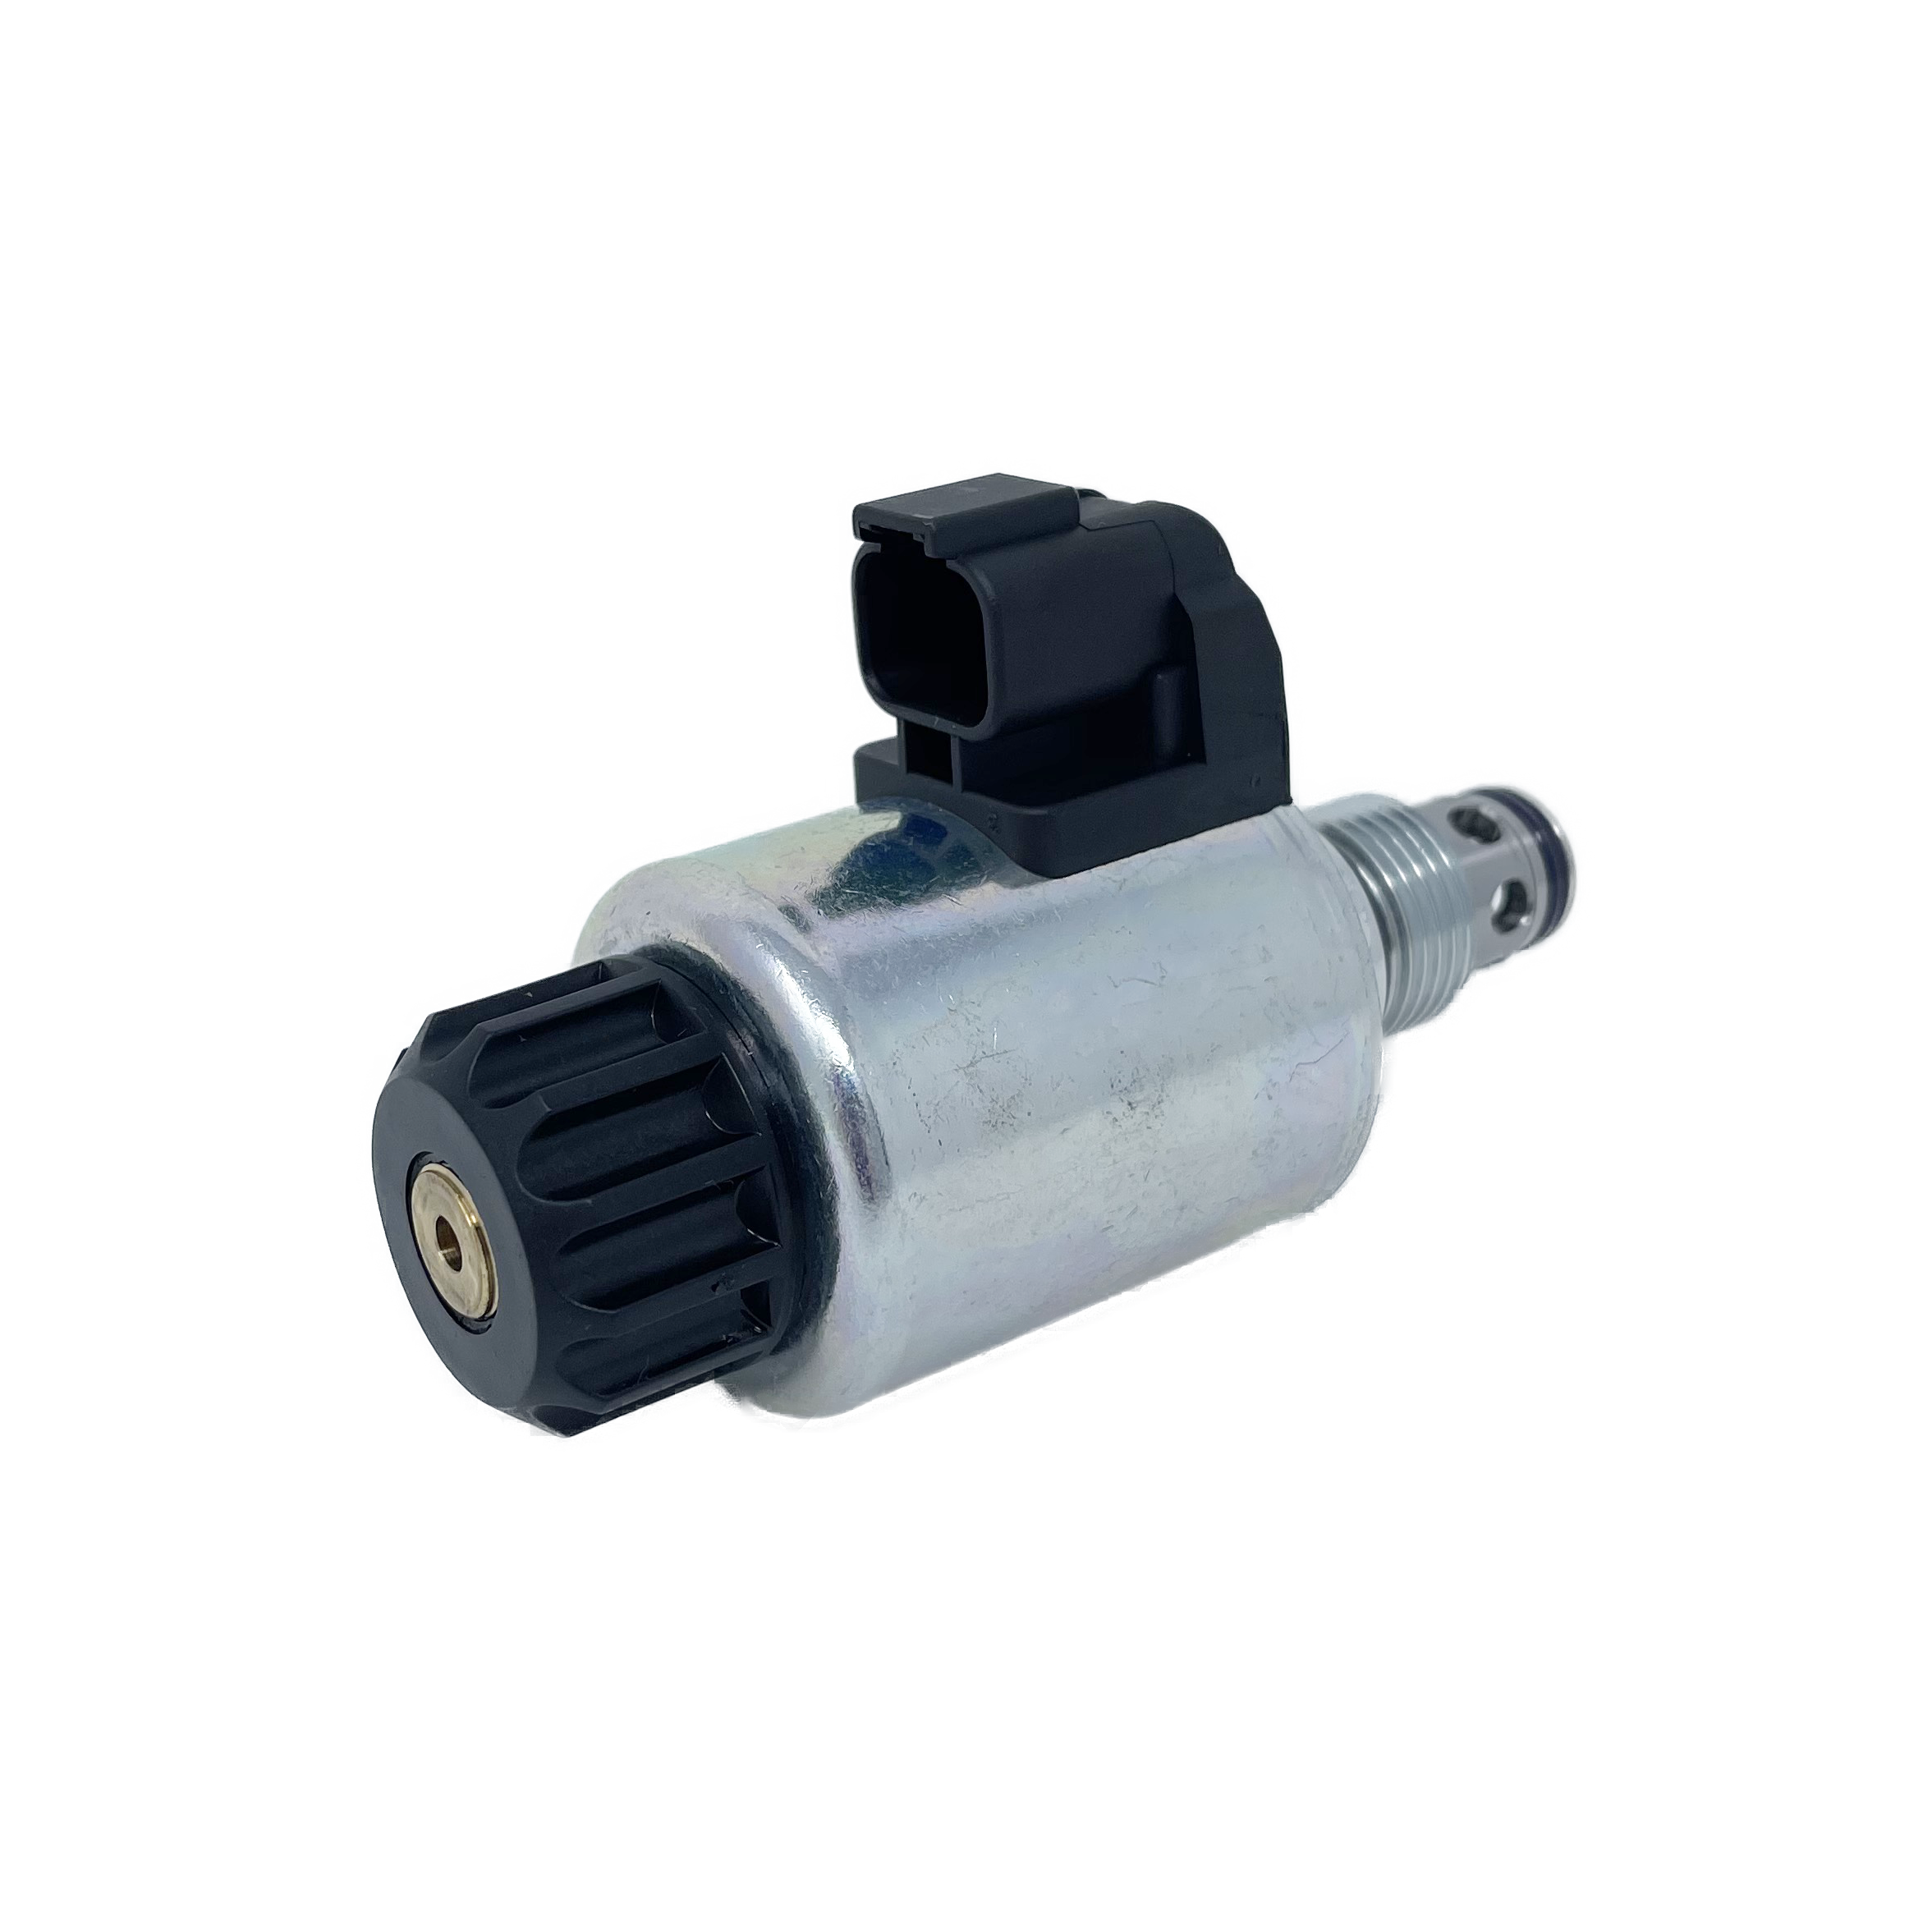 SD3E-B2/H2O2A24DT : Argo DCV, 16GPM, 5100psi, 2P2W, C-10-2, 24 VDC Deutsch, Flow 1 to 2 Neutral